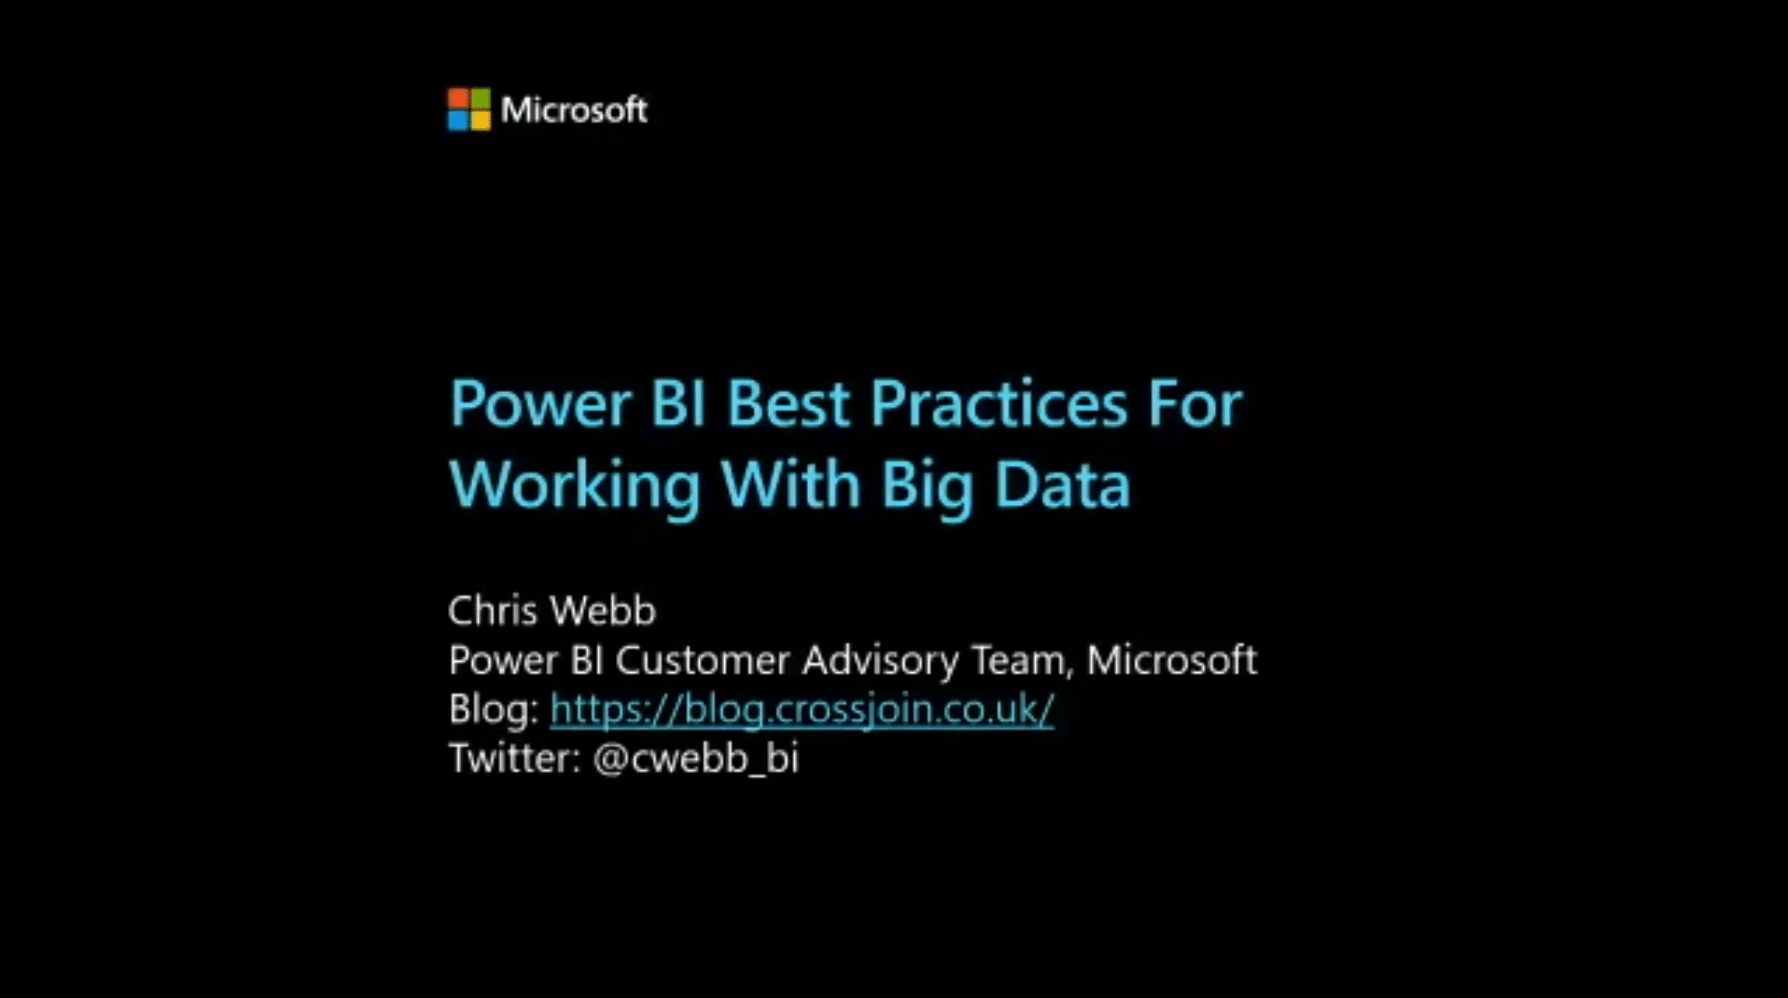 Power BI Best Practices for Working with Big Data